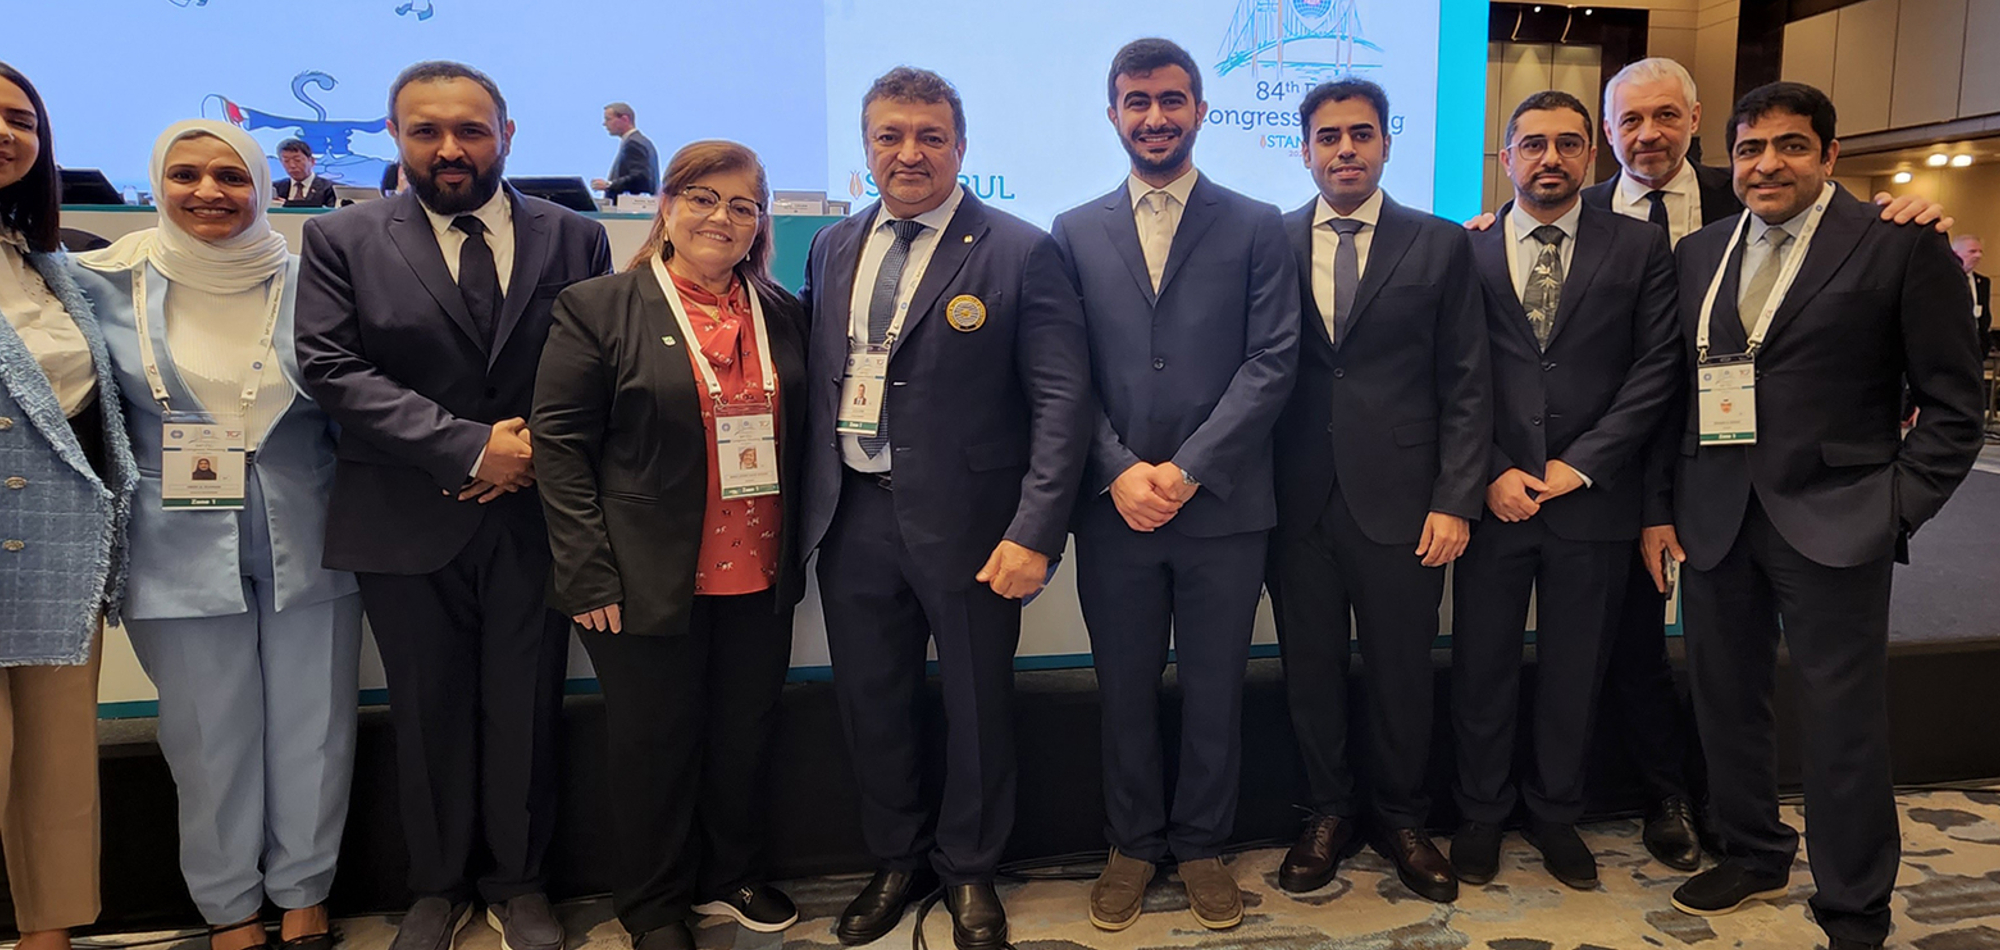 Qatar selected to host 85th FIG Congress by global gymnastics family